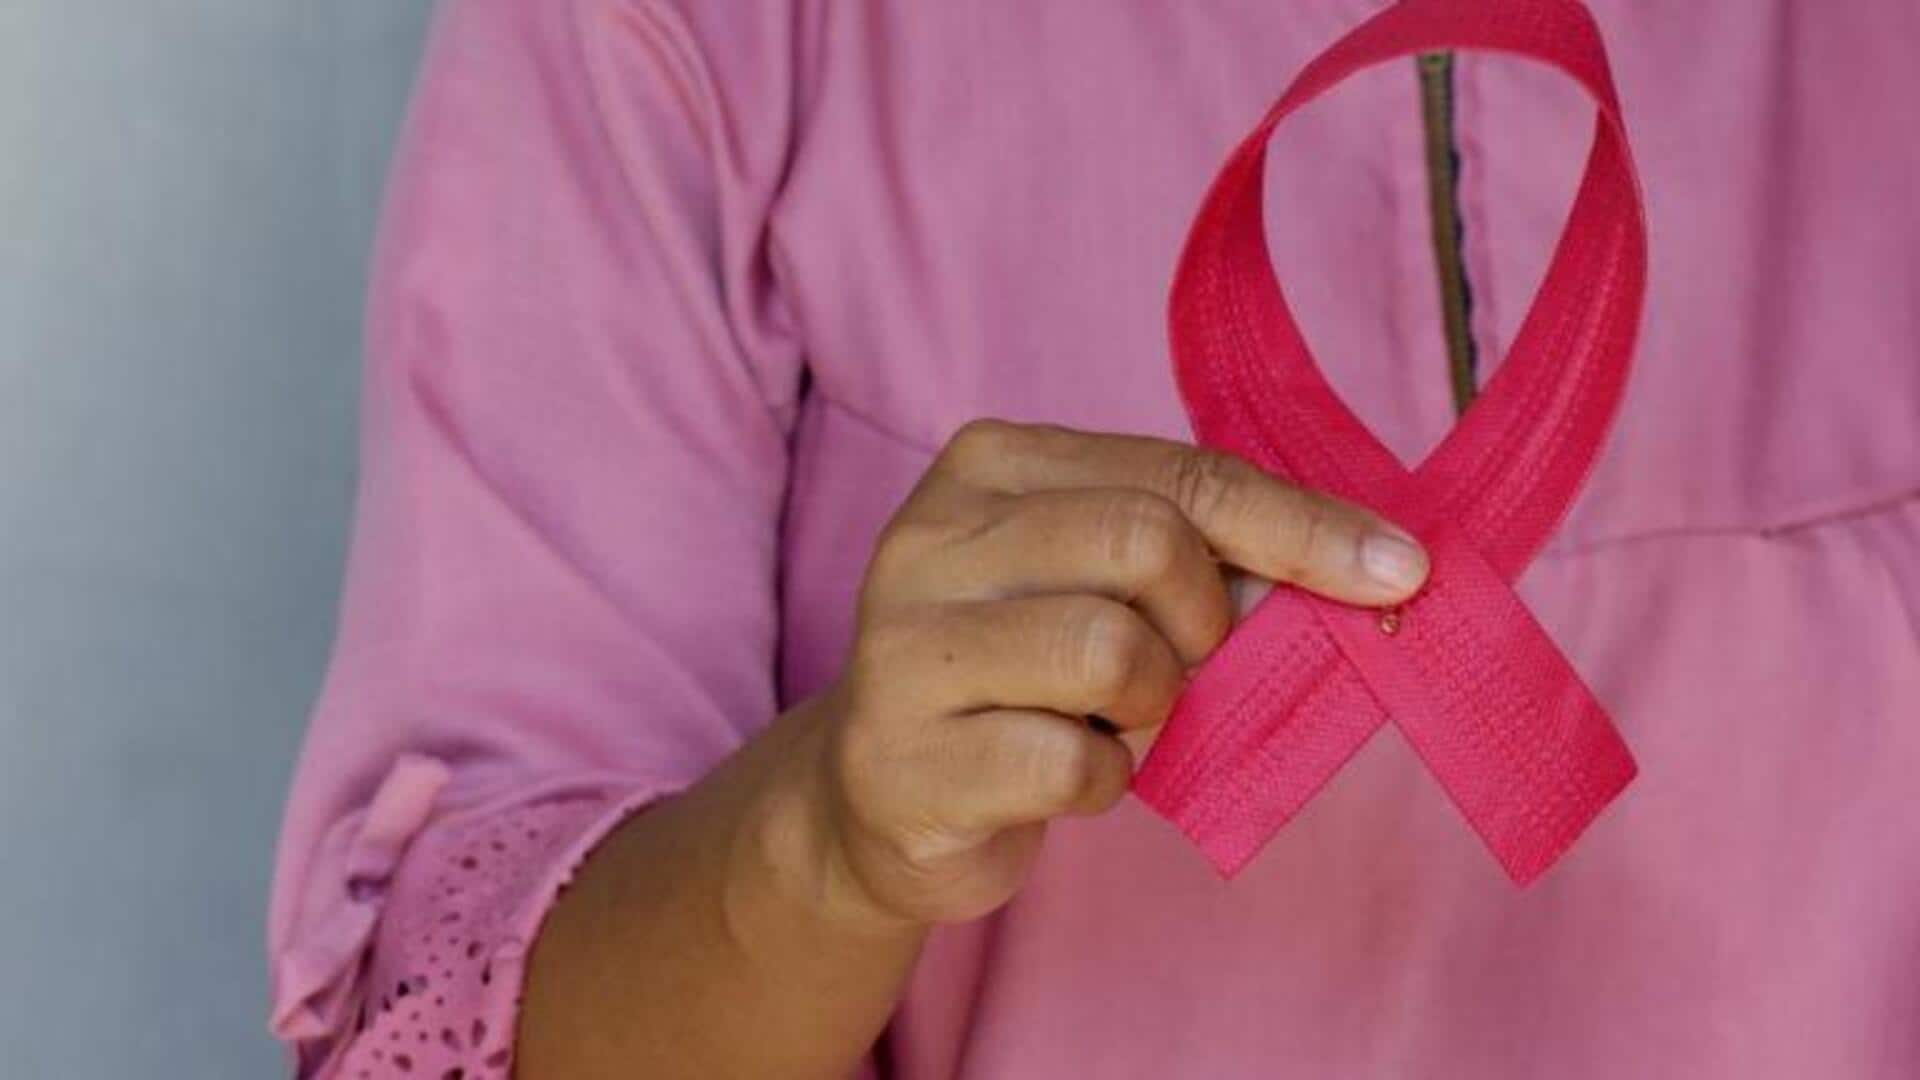 New blood test predicts breast cancer recurrence years before symptoms